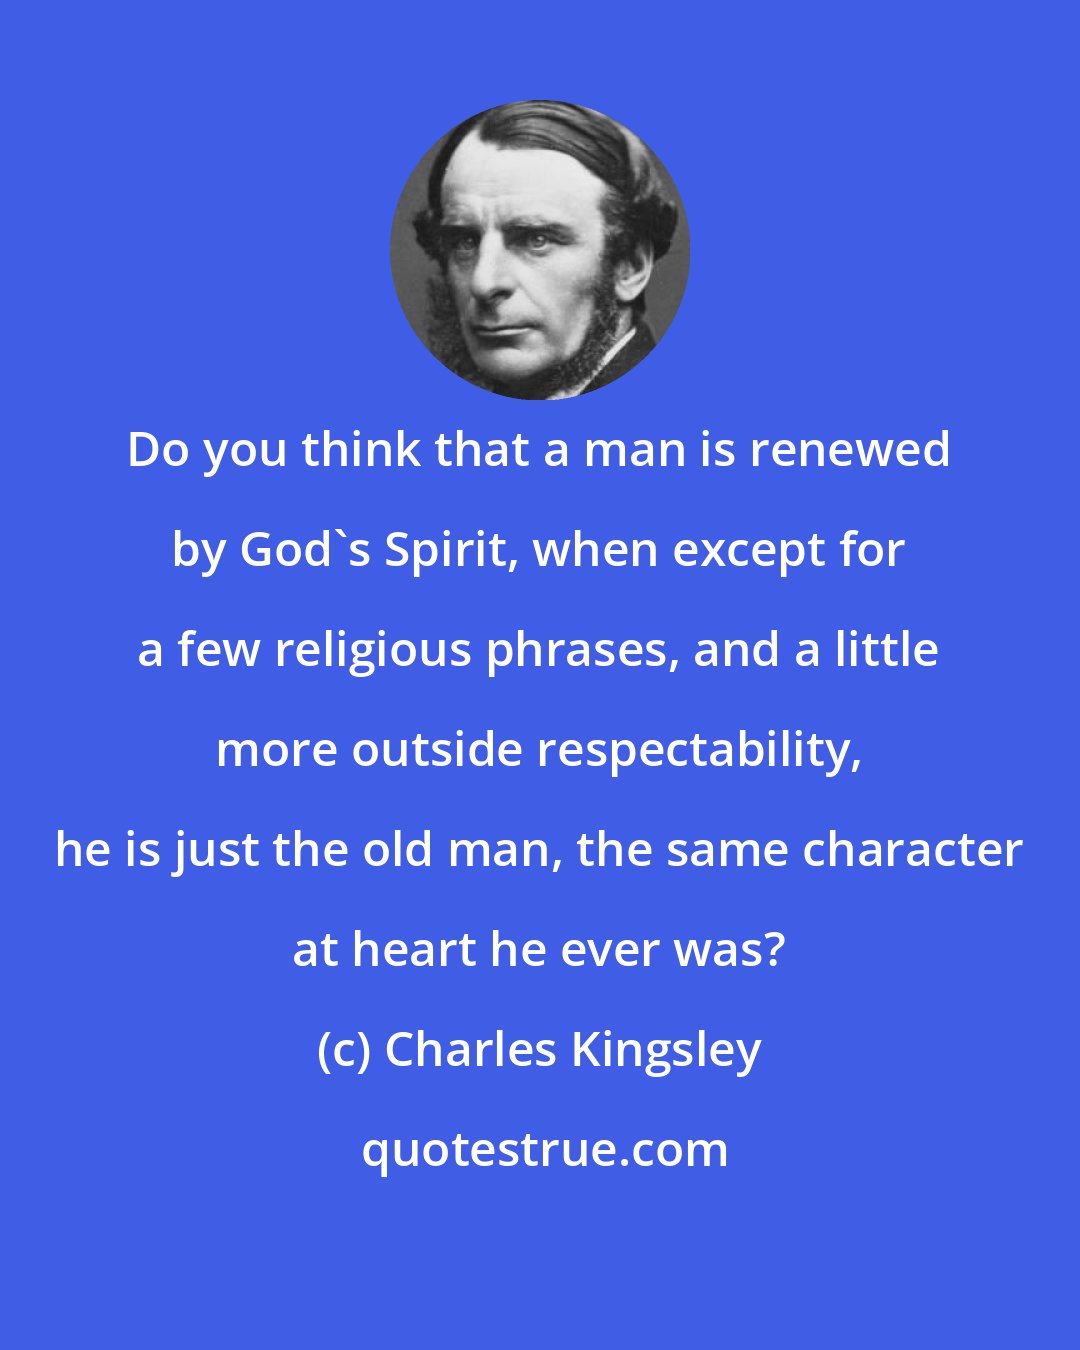 Charles Kingsley: Do you think that a man is renewed by God's Spirit, when except for a few religious phrases, and a little more outside respectability, he is just the old man, the same character at heart he ever was?